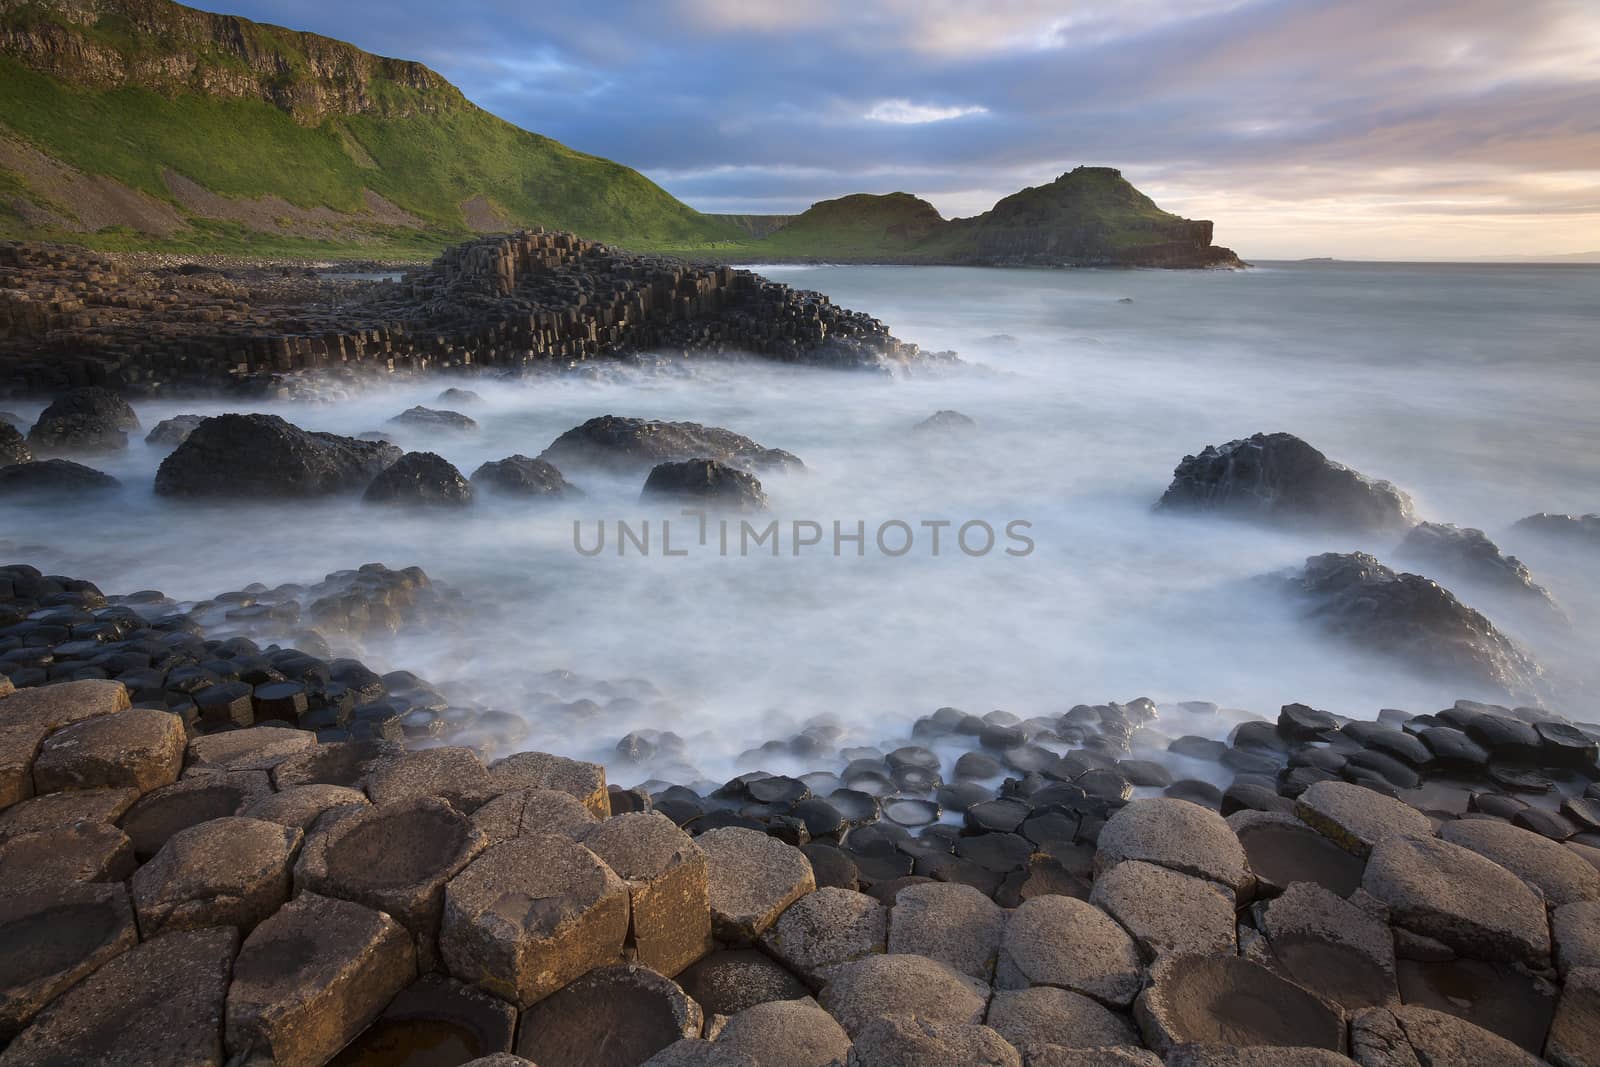 The Giants Causeway in County Antrim in Northern Ireland. A UNESCO World Heritage Site.